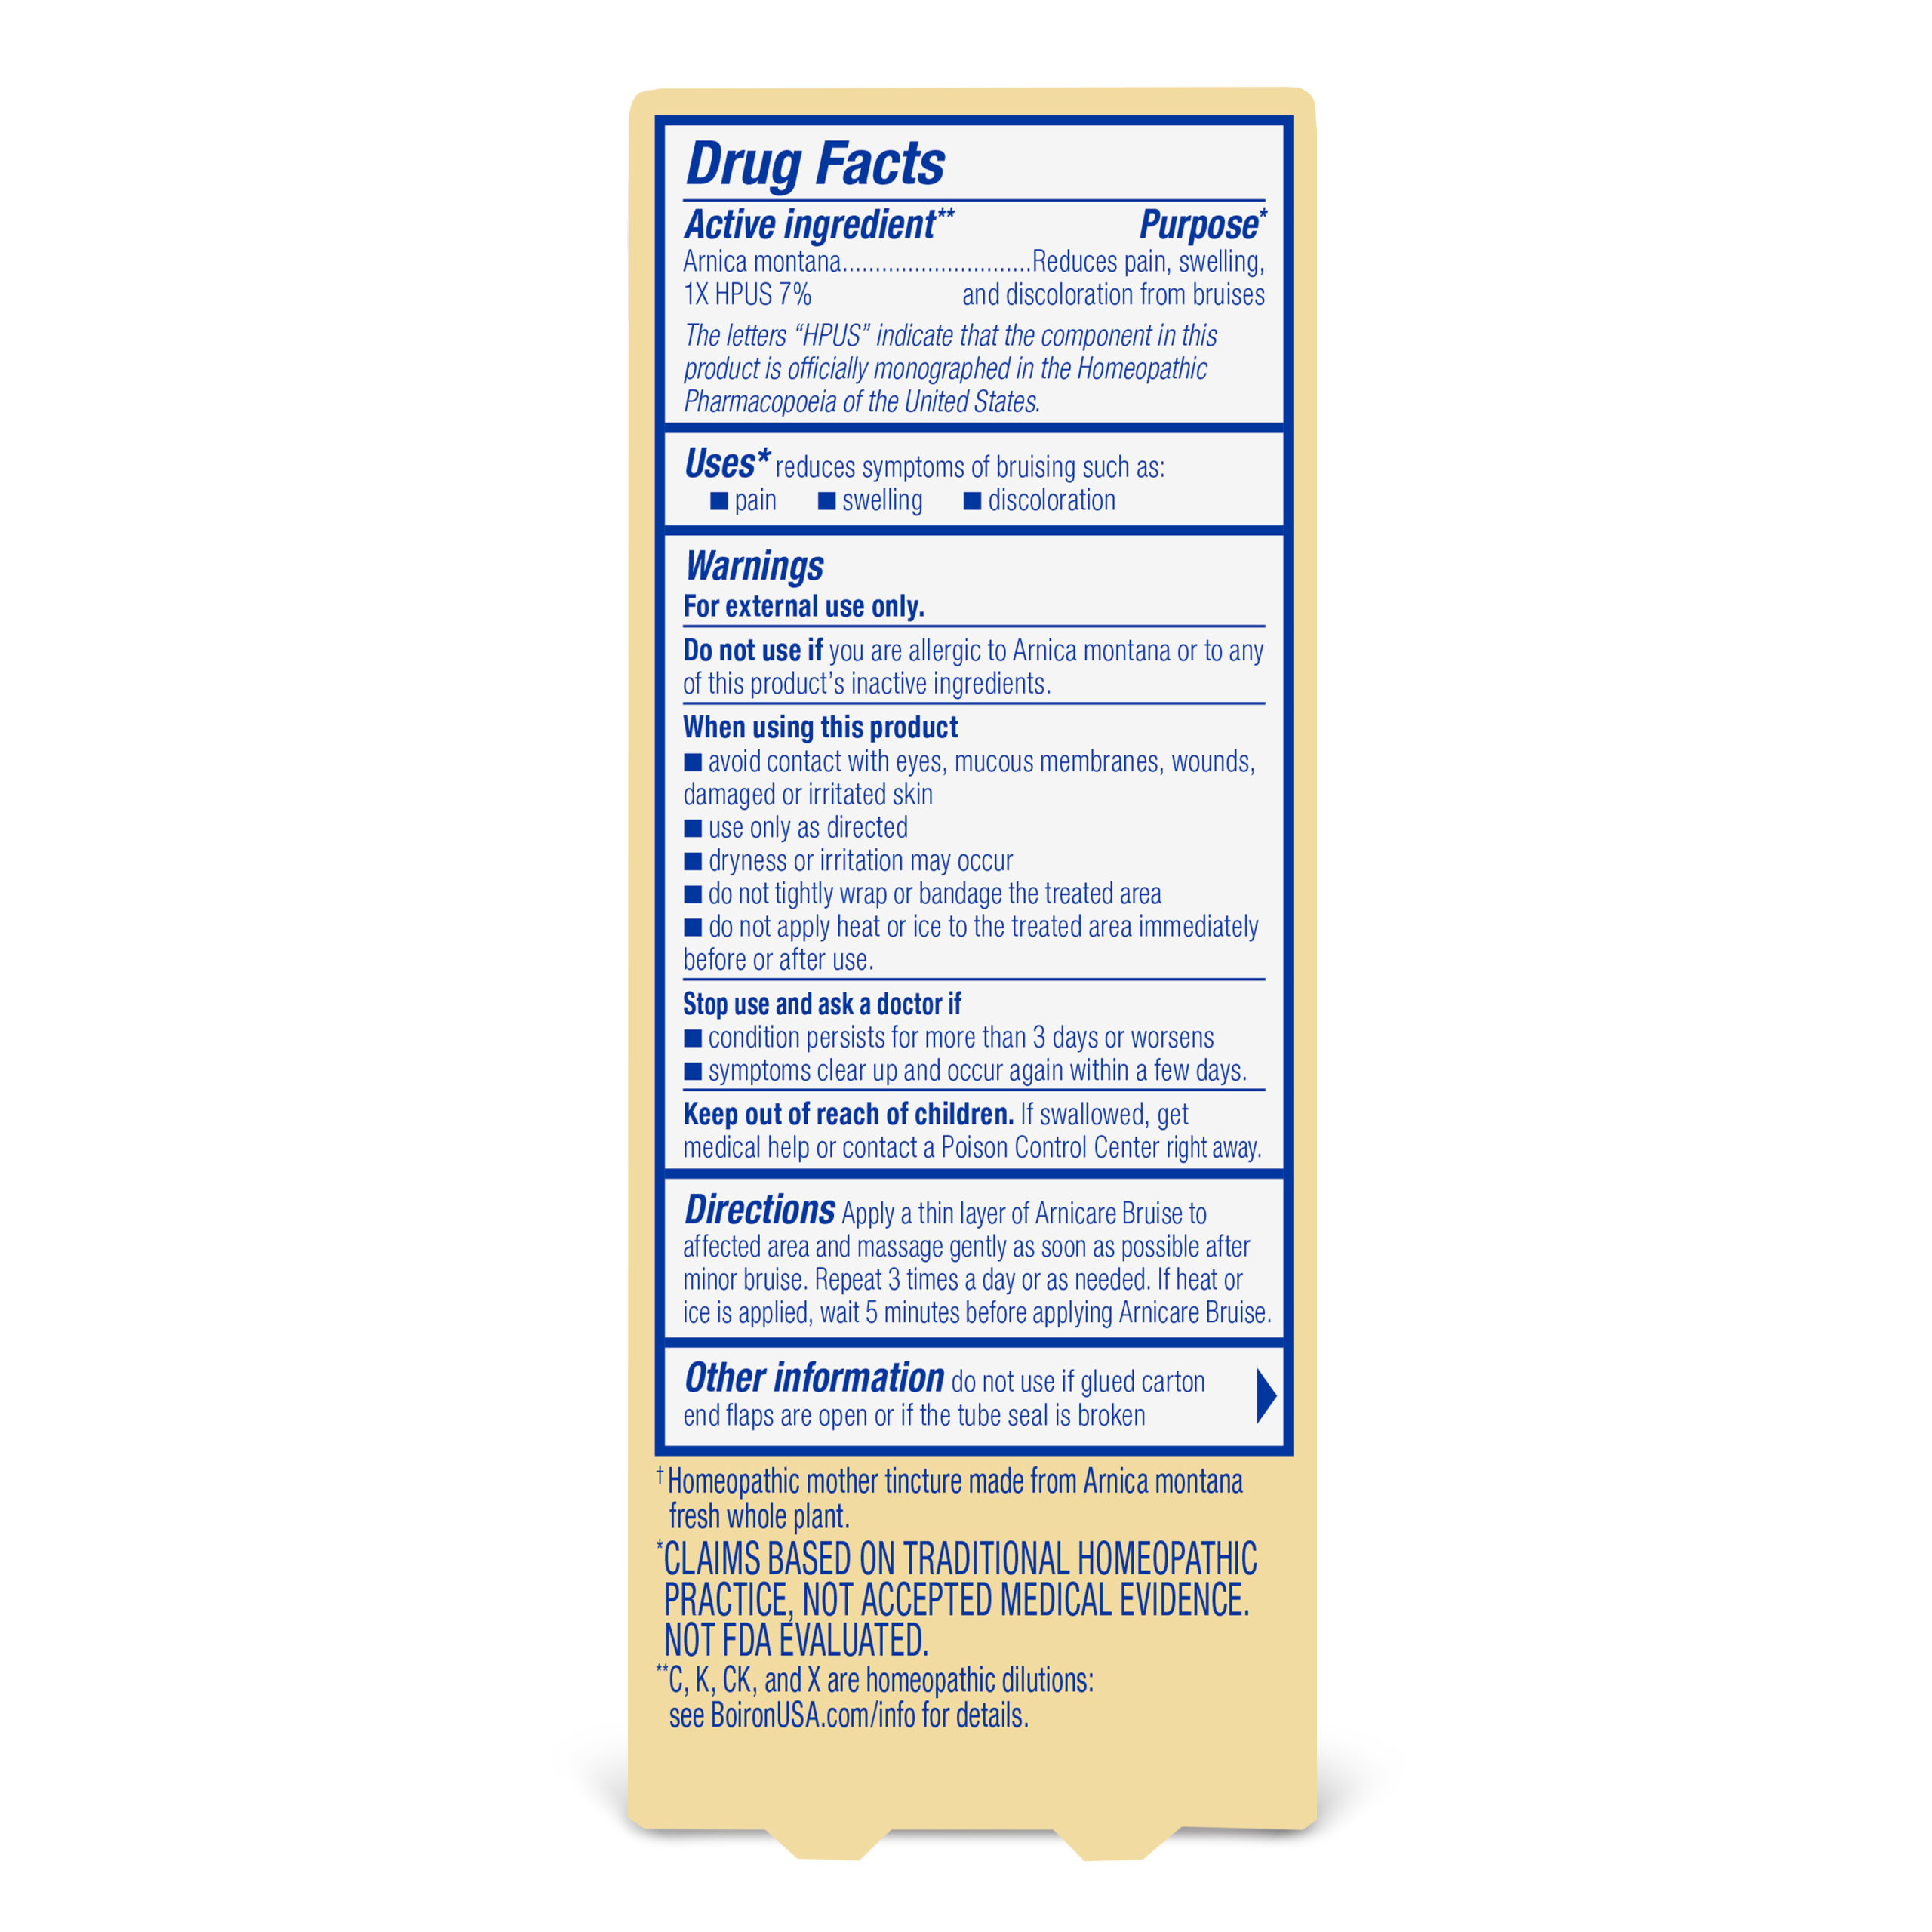 Arnicare Arnica Gel Pain Relief - 1.5 oz. by Boiron (pack of 4) 